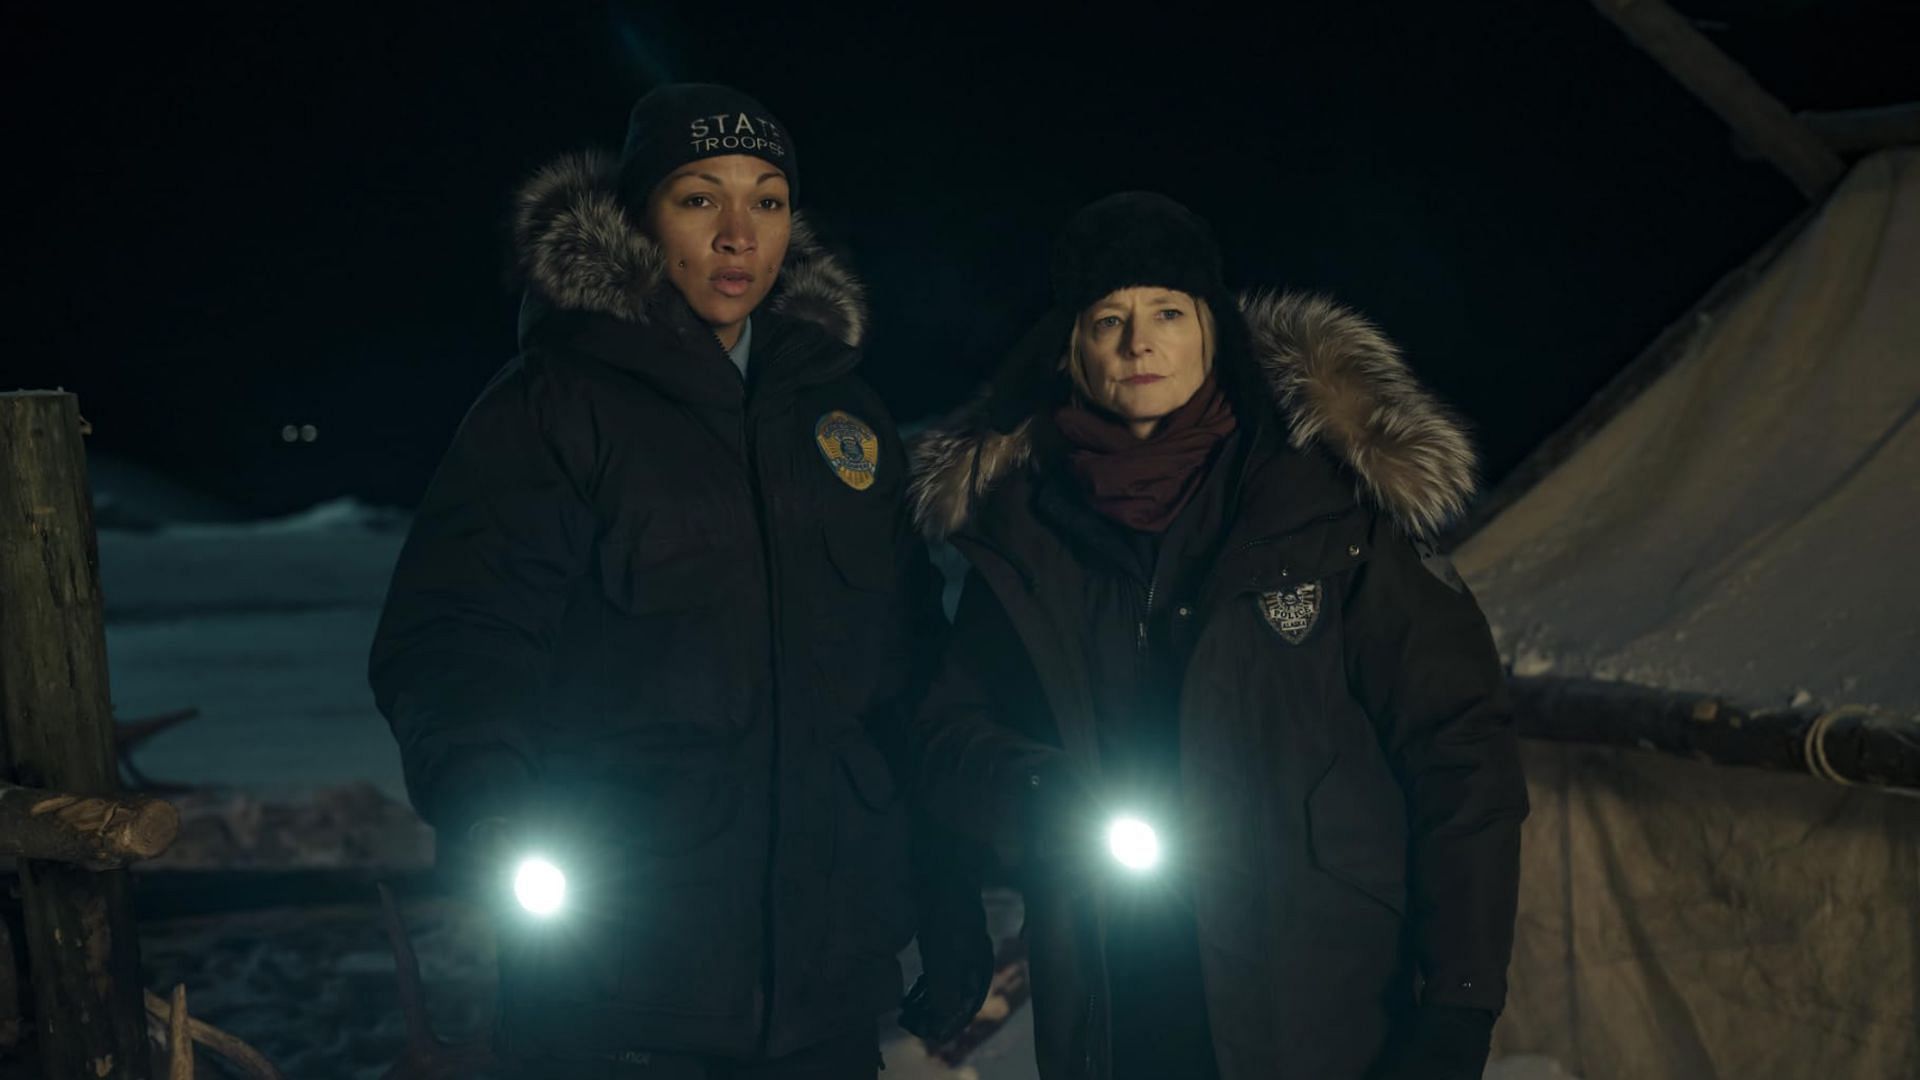 Kali Reis (L) and Jodie Foster (R) in a still from the show (Image via HBO)